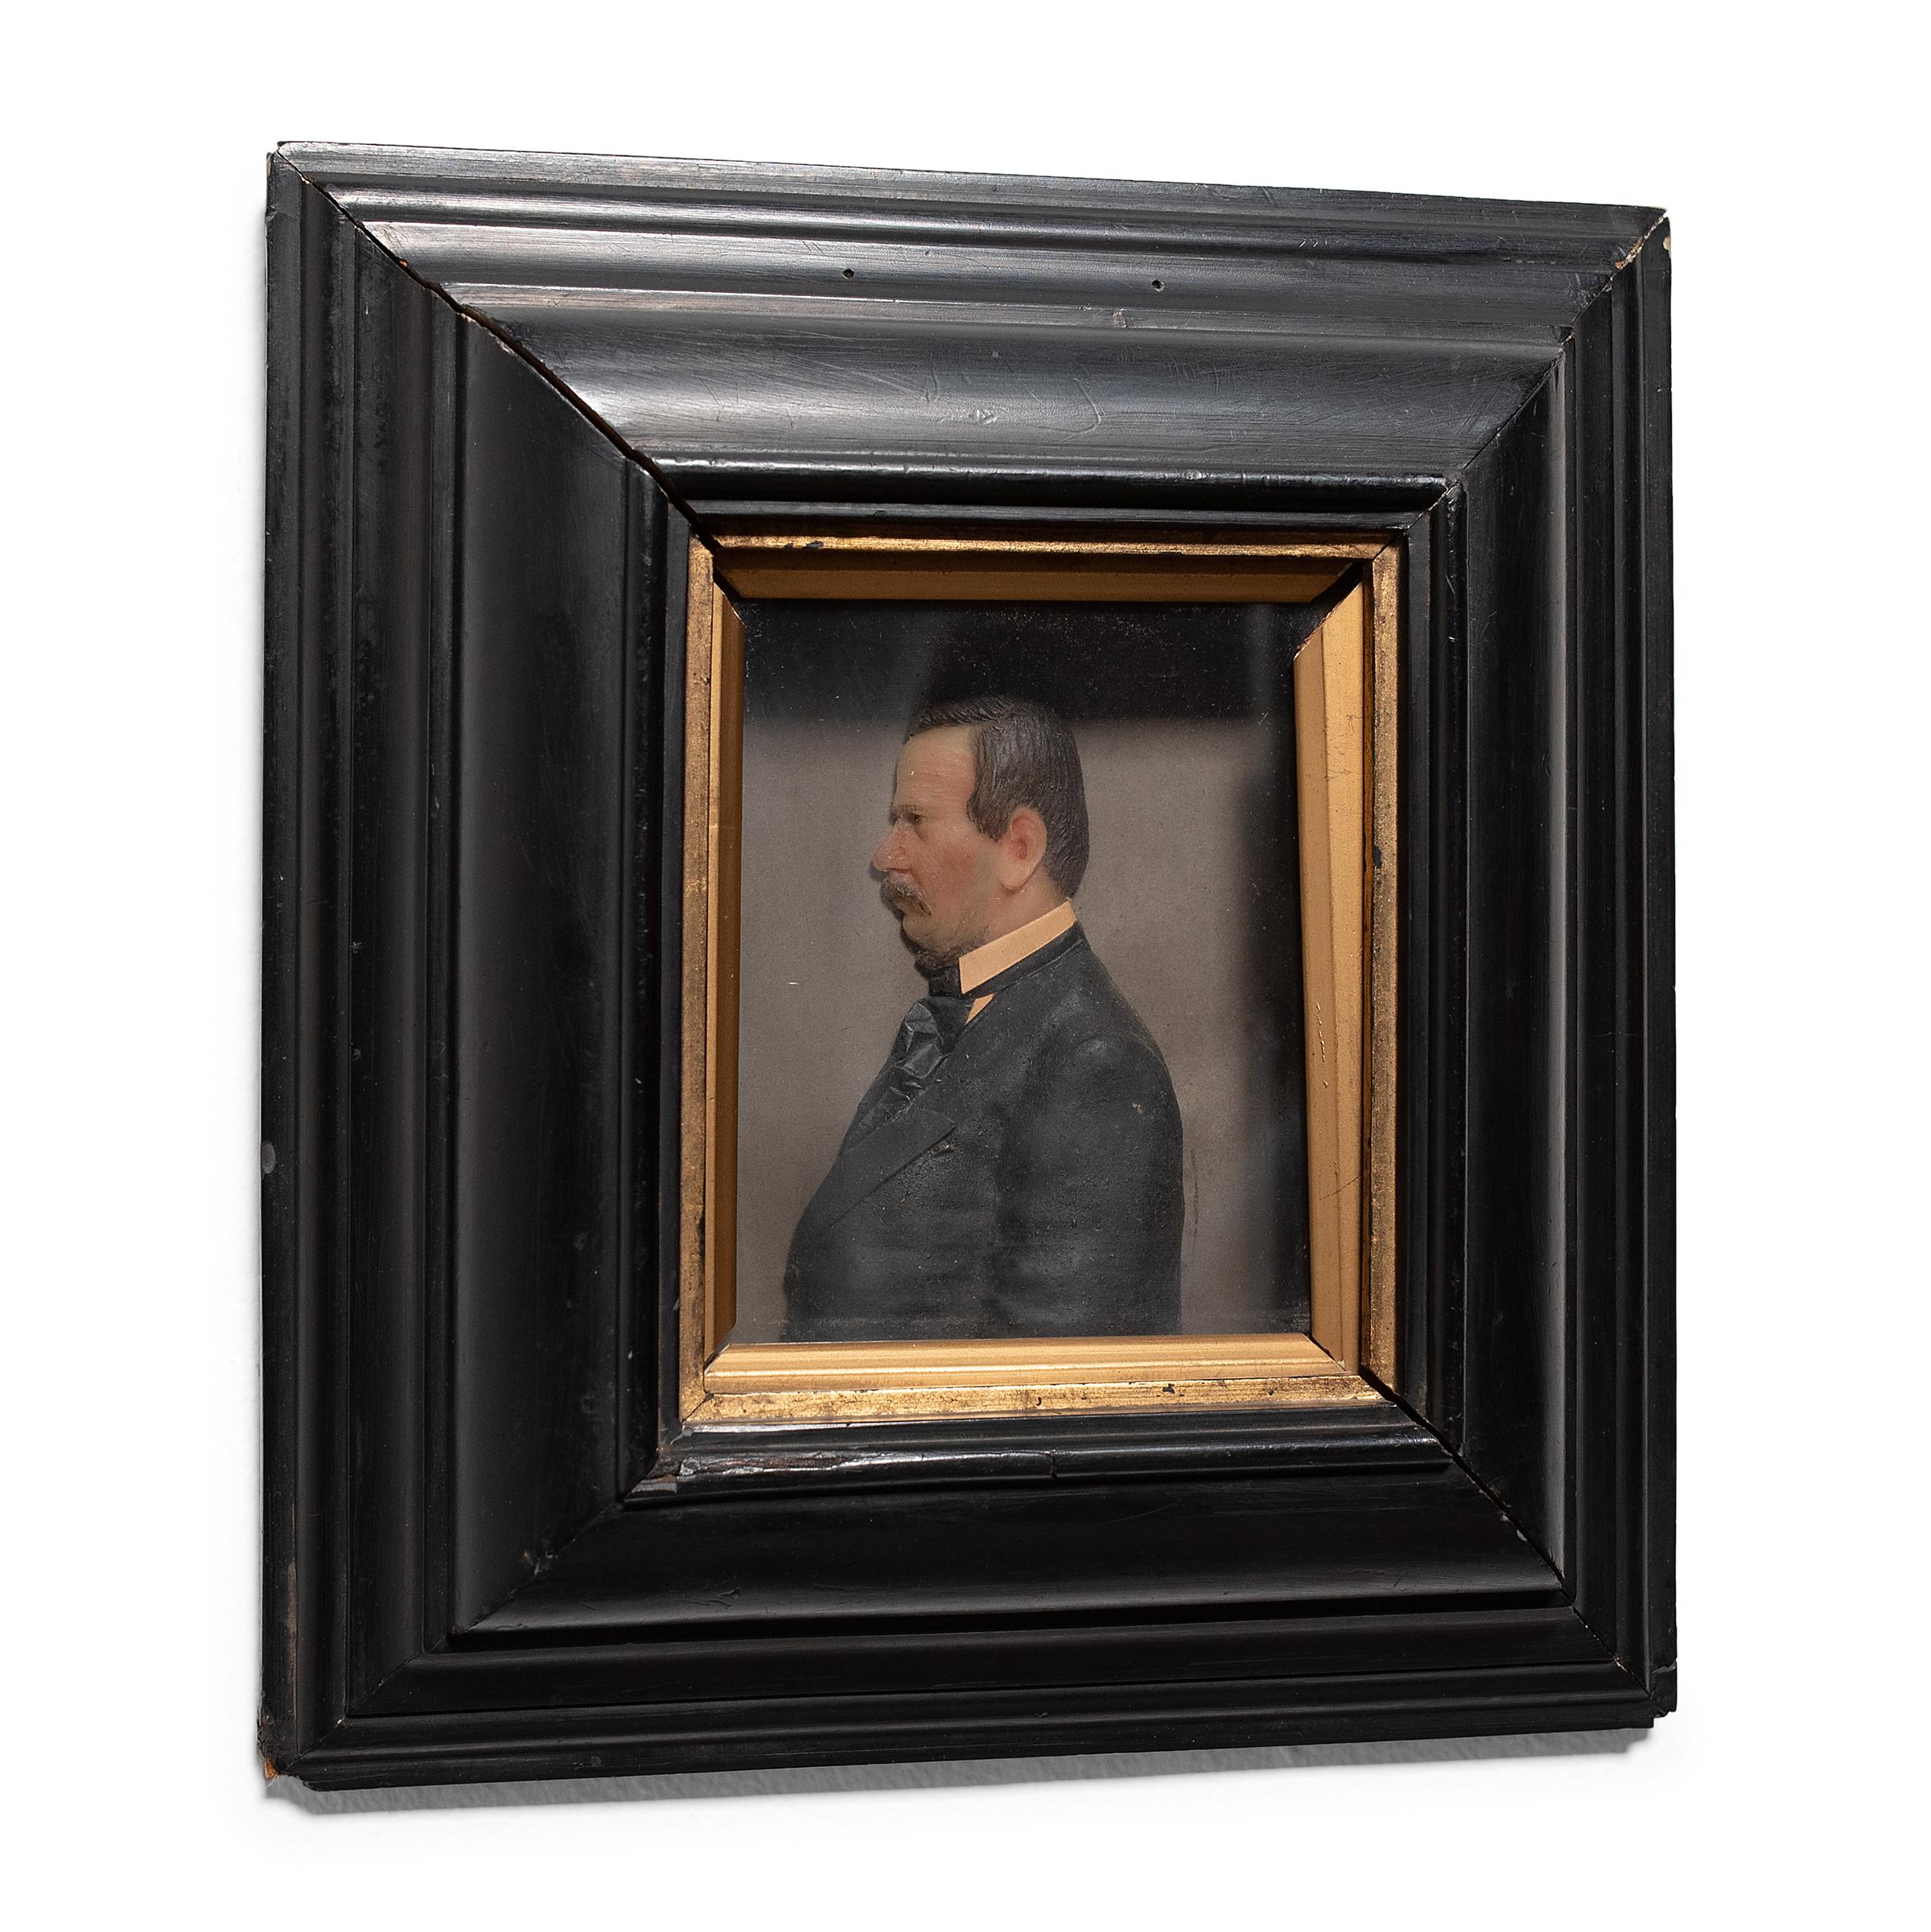 Wax is one of the earliest known mediums for portraiture. Miniature wax portraits were first invented in Italy during the 16th century and remained exceedingly popular around the world until the mid 19th century. The portraits were generally made as